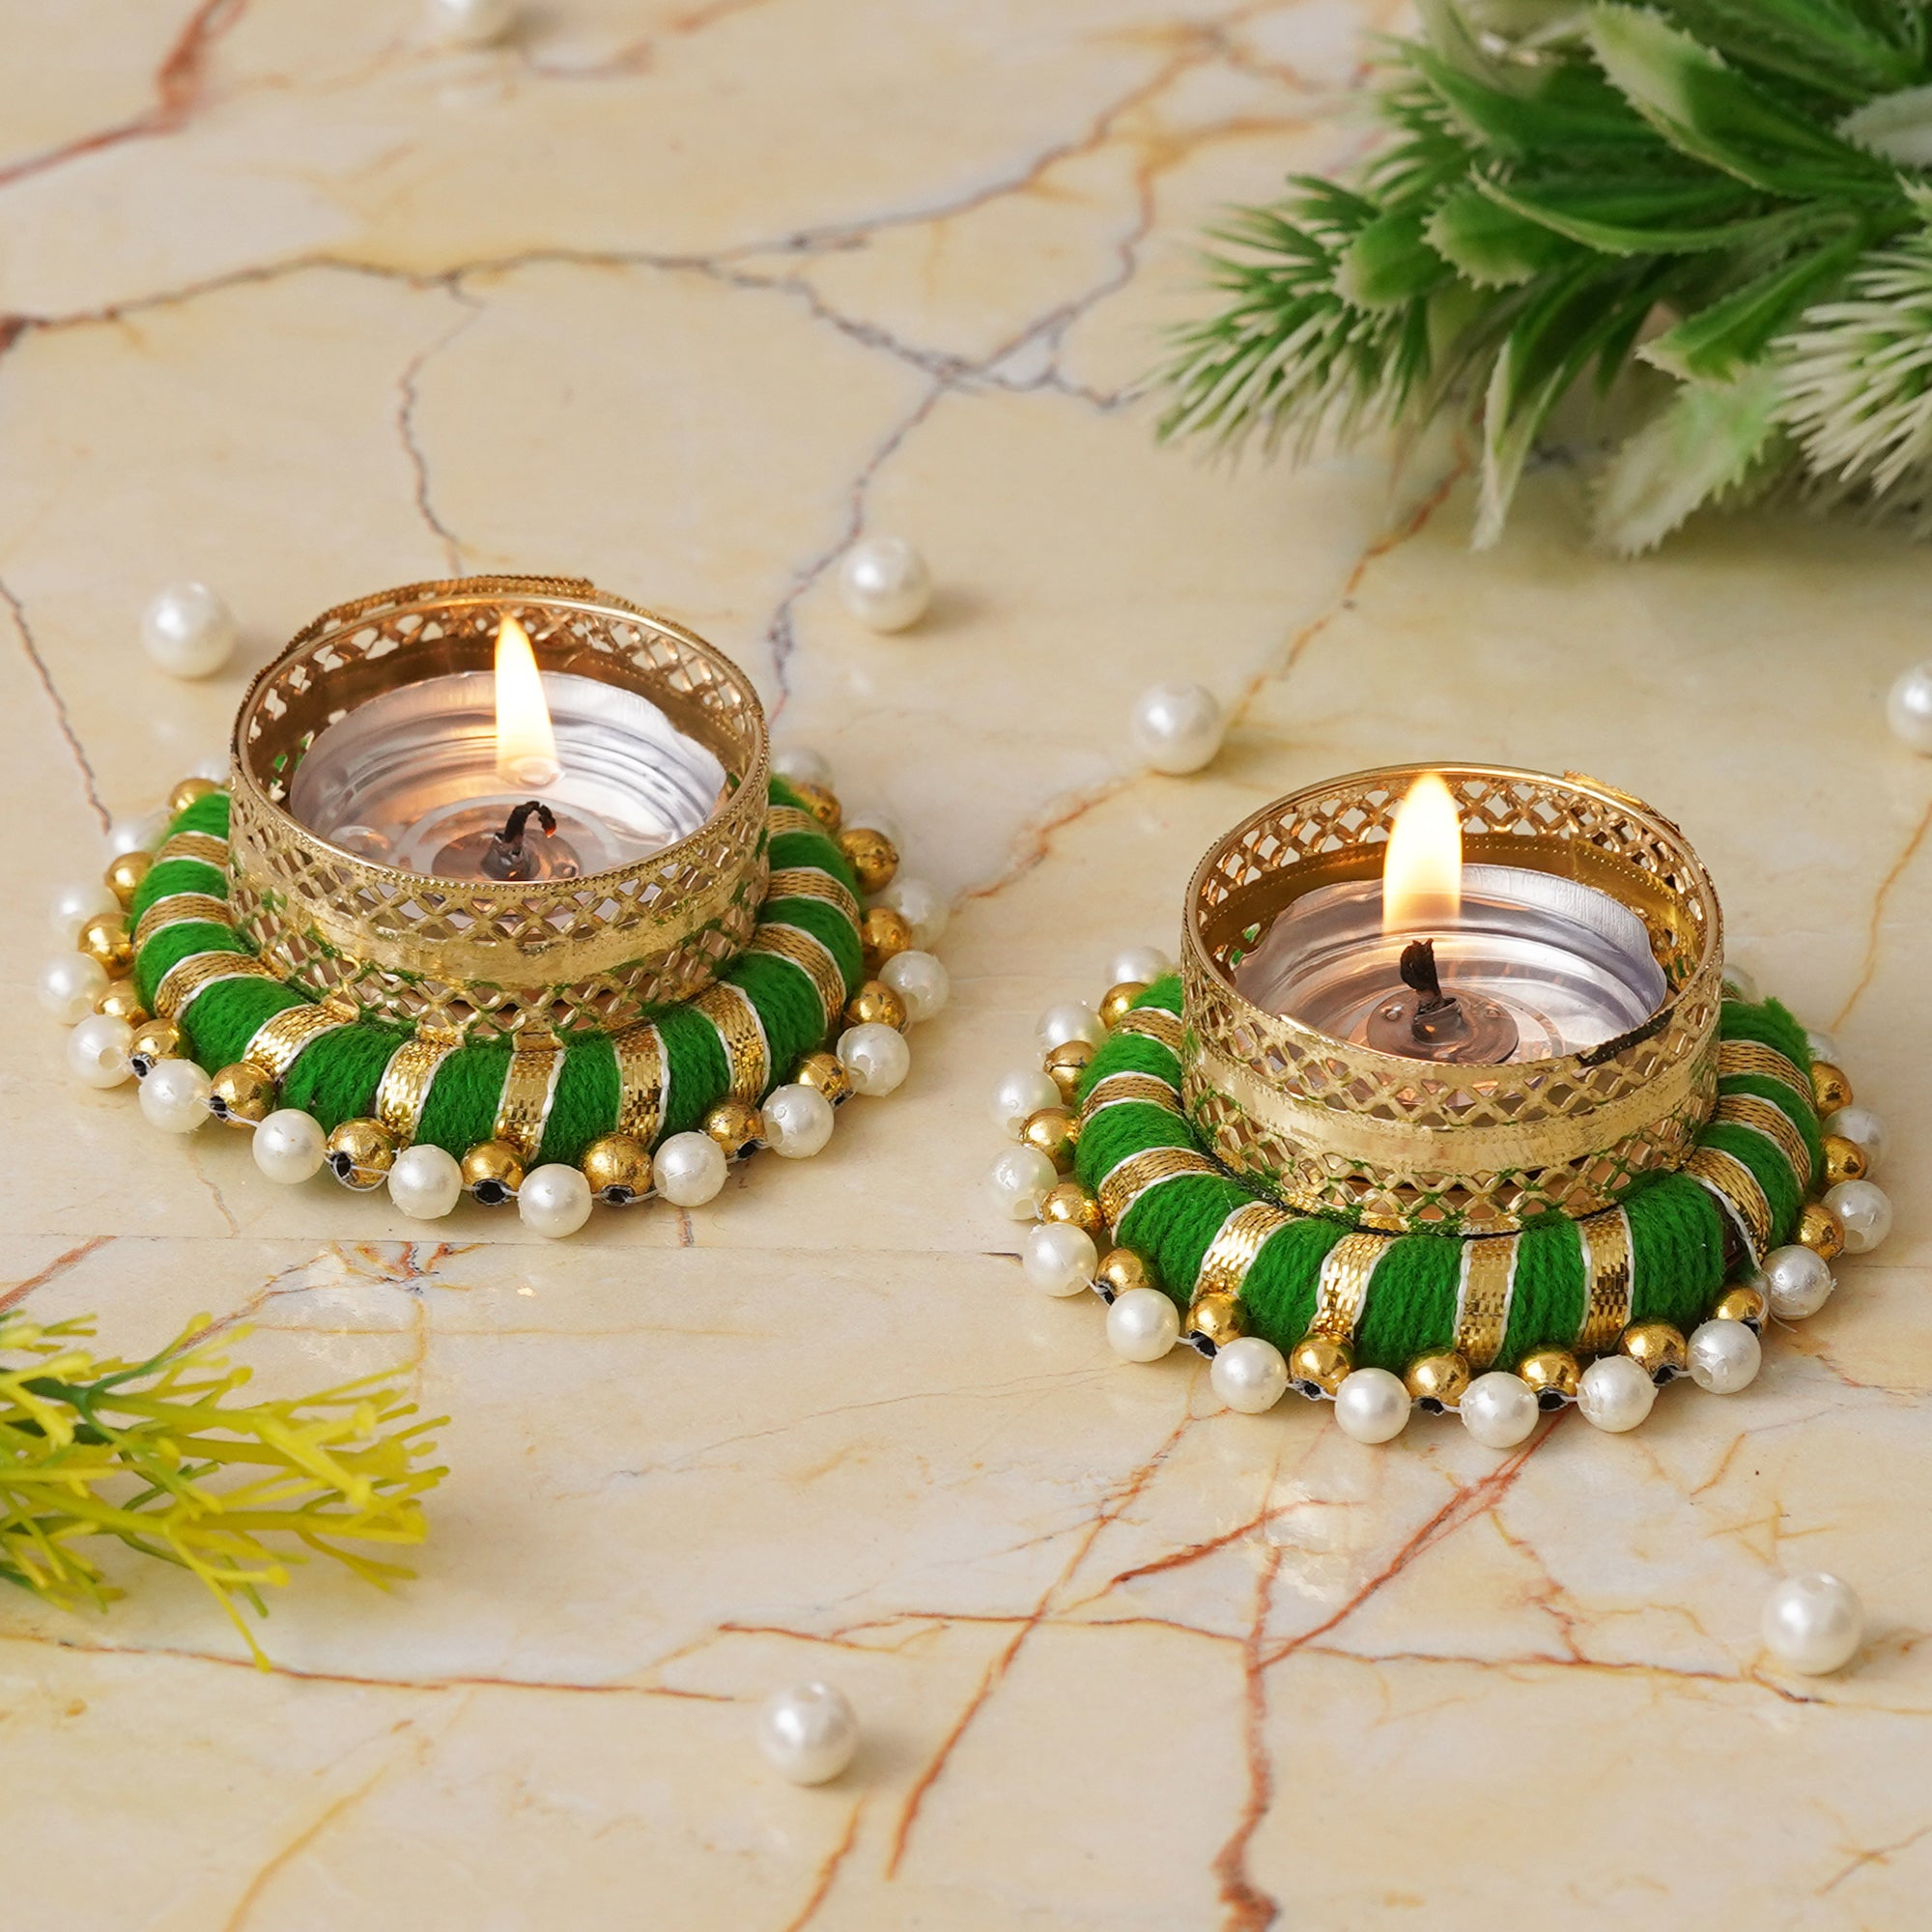 eCraftIndia Golden and Green Decorative Tea Light Candle Holders (Set of 2) 1